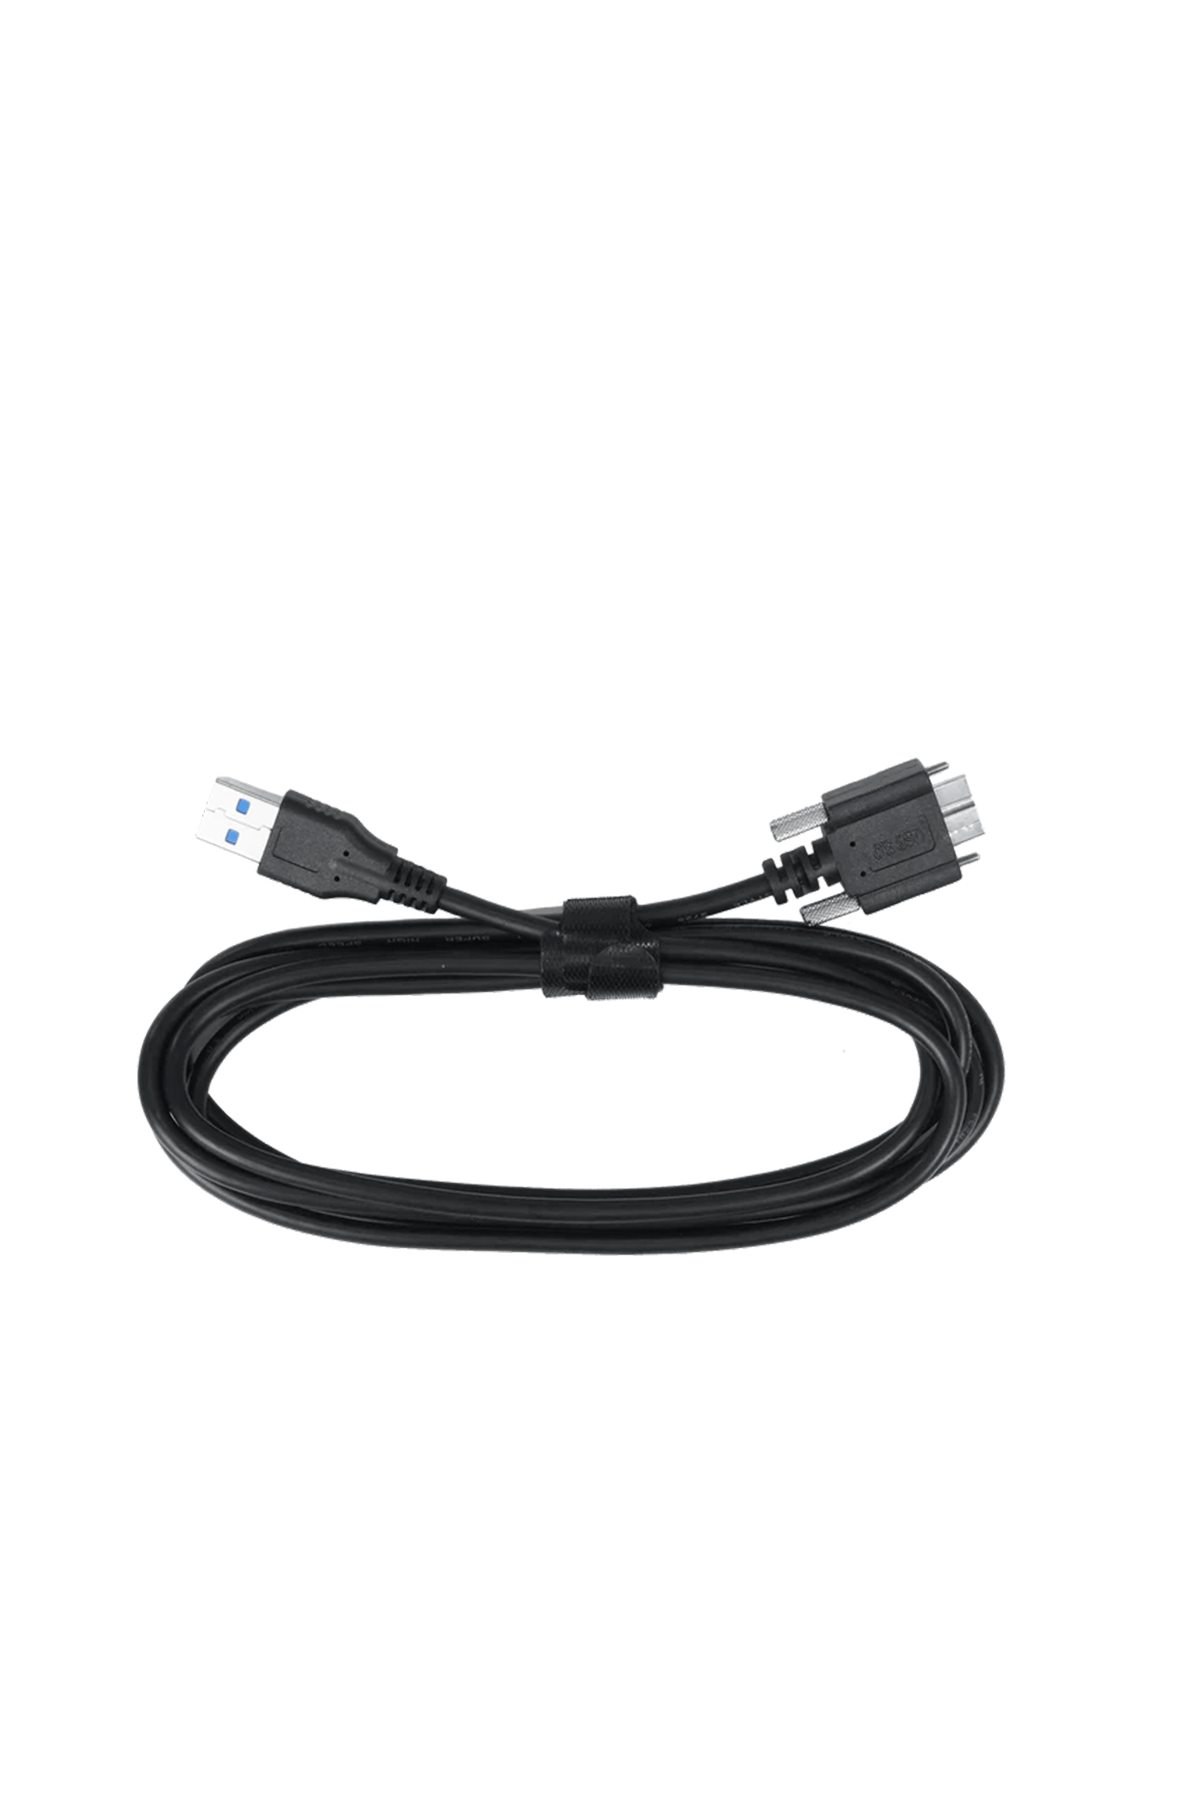 Revopoint USB Type A Cabl